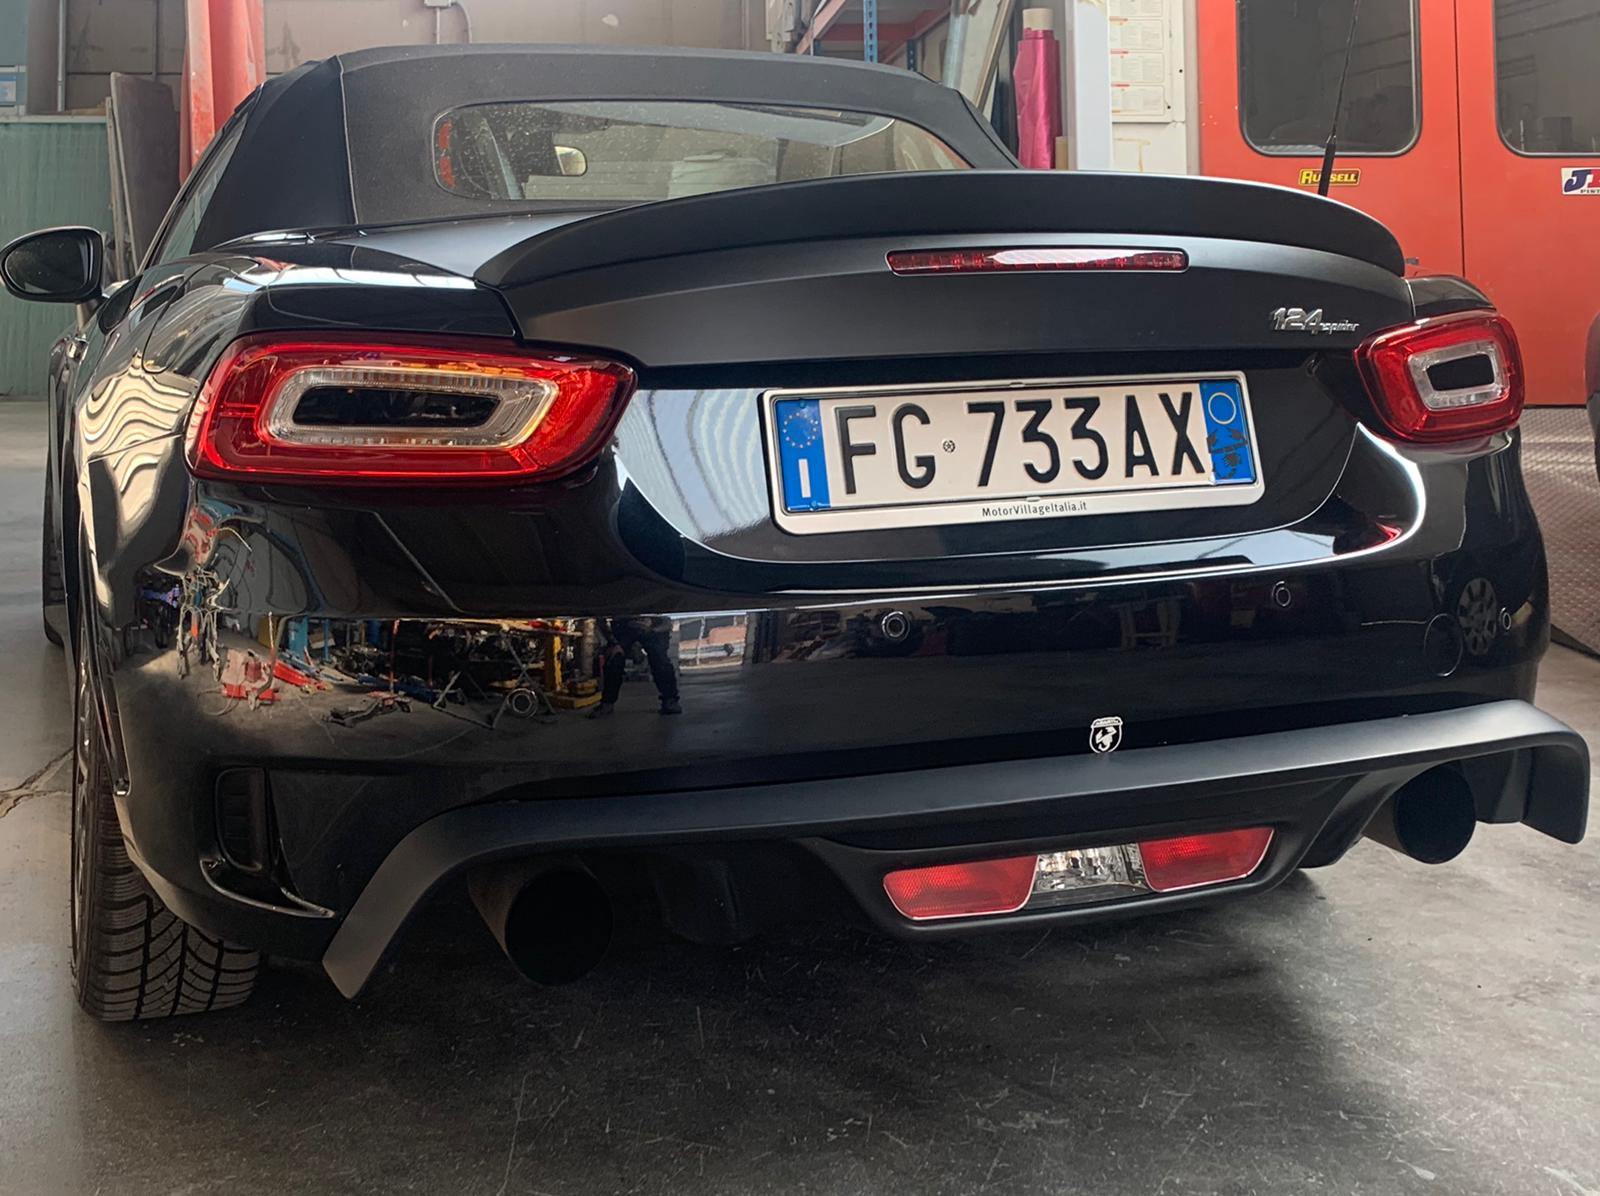 CHD Tuning Rear Diffuser Extension for Abarth 124 Spider - Abarth Tuning